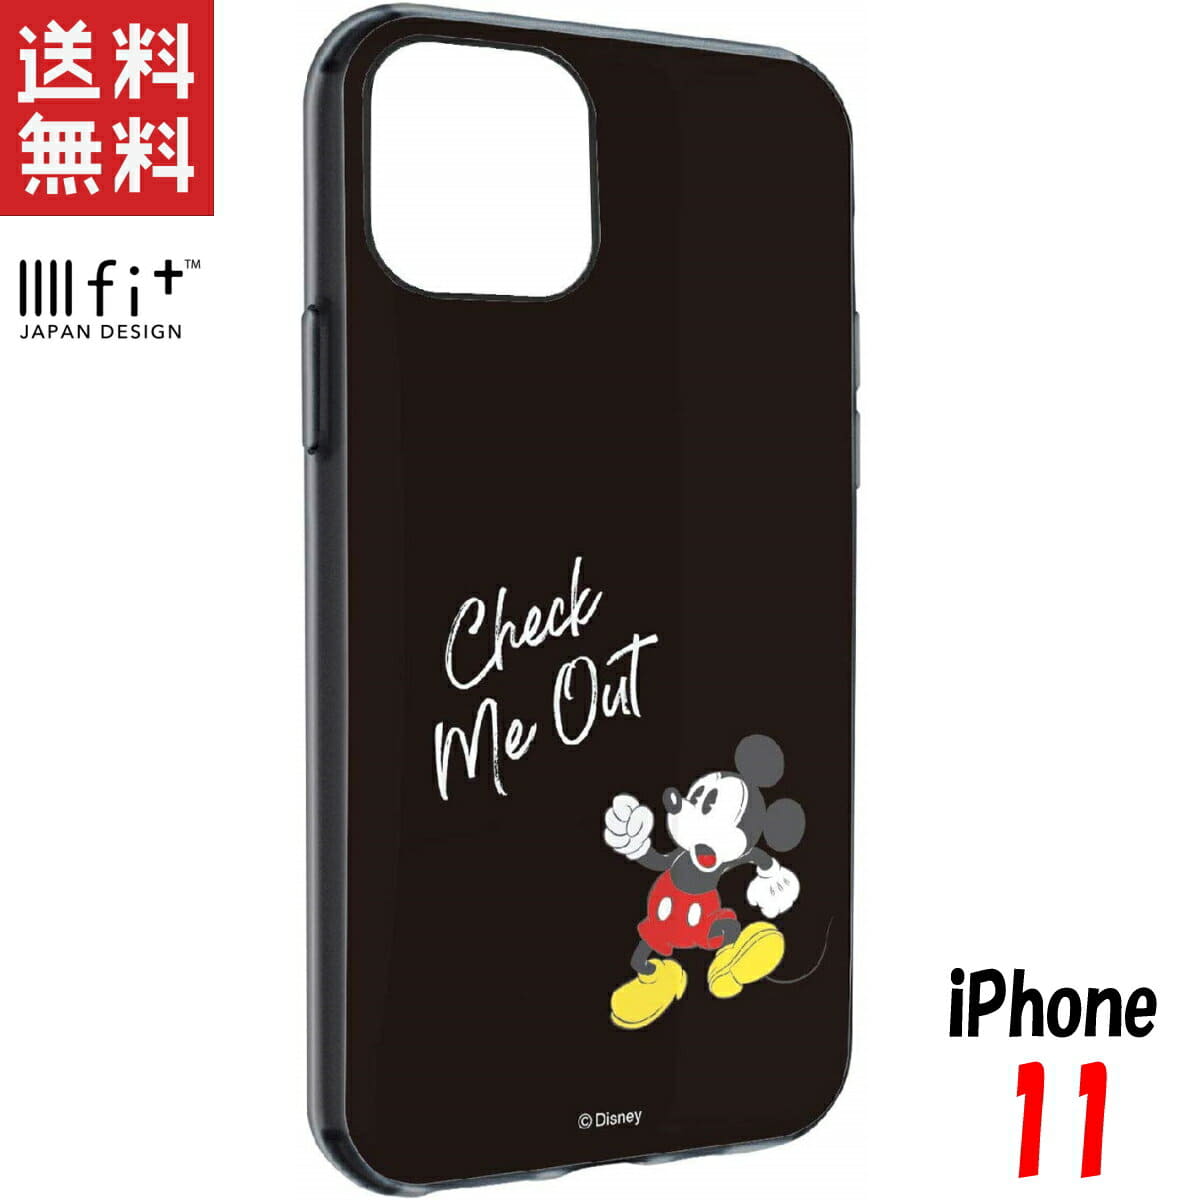 New Disney Iphone11 Case E Fit Iiiifit Fancy Goods Mickey Mouse Dn 655a Be Forward Store